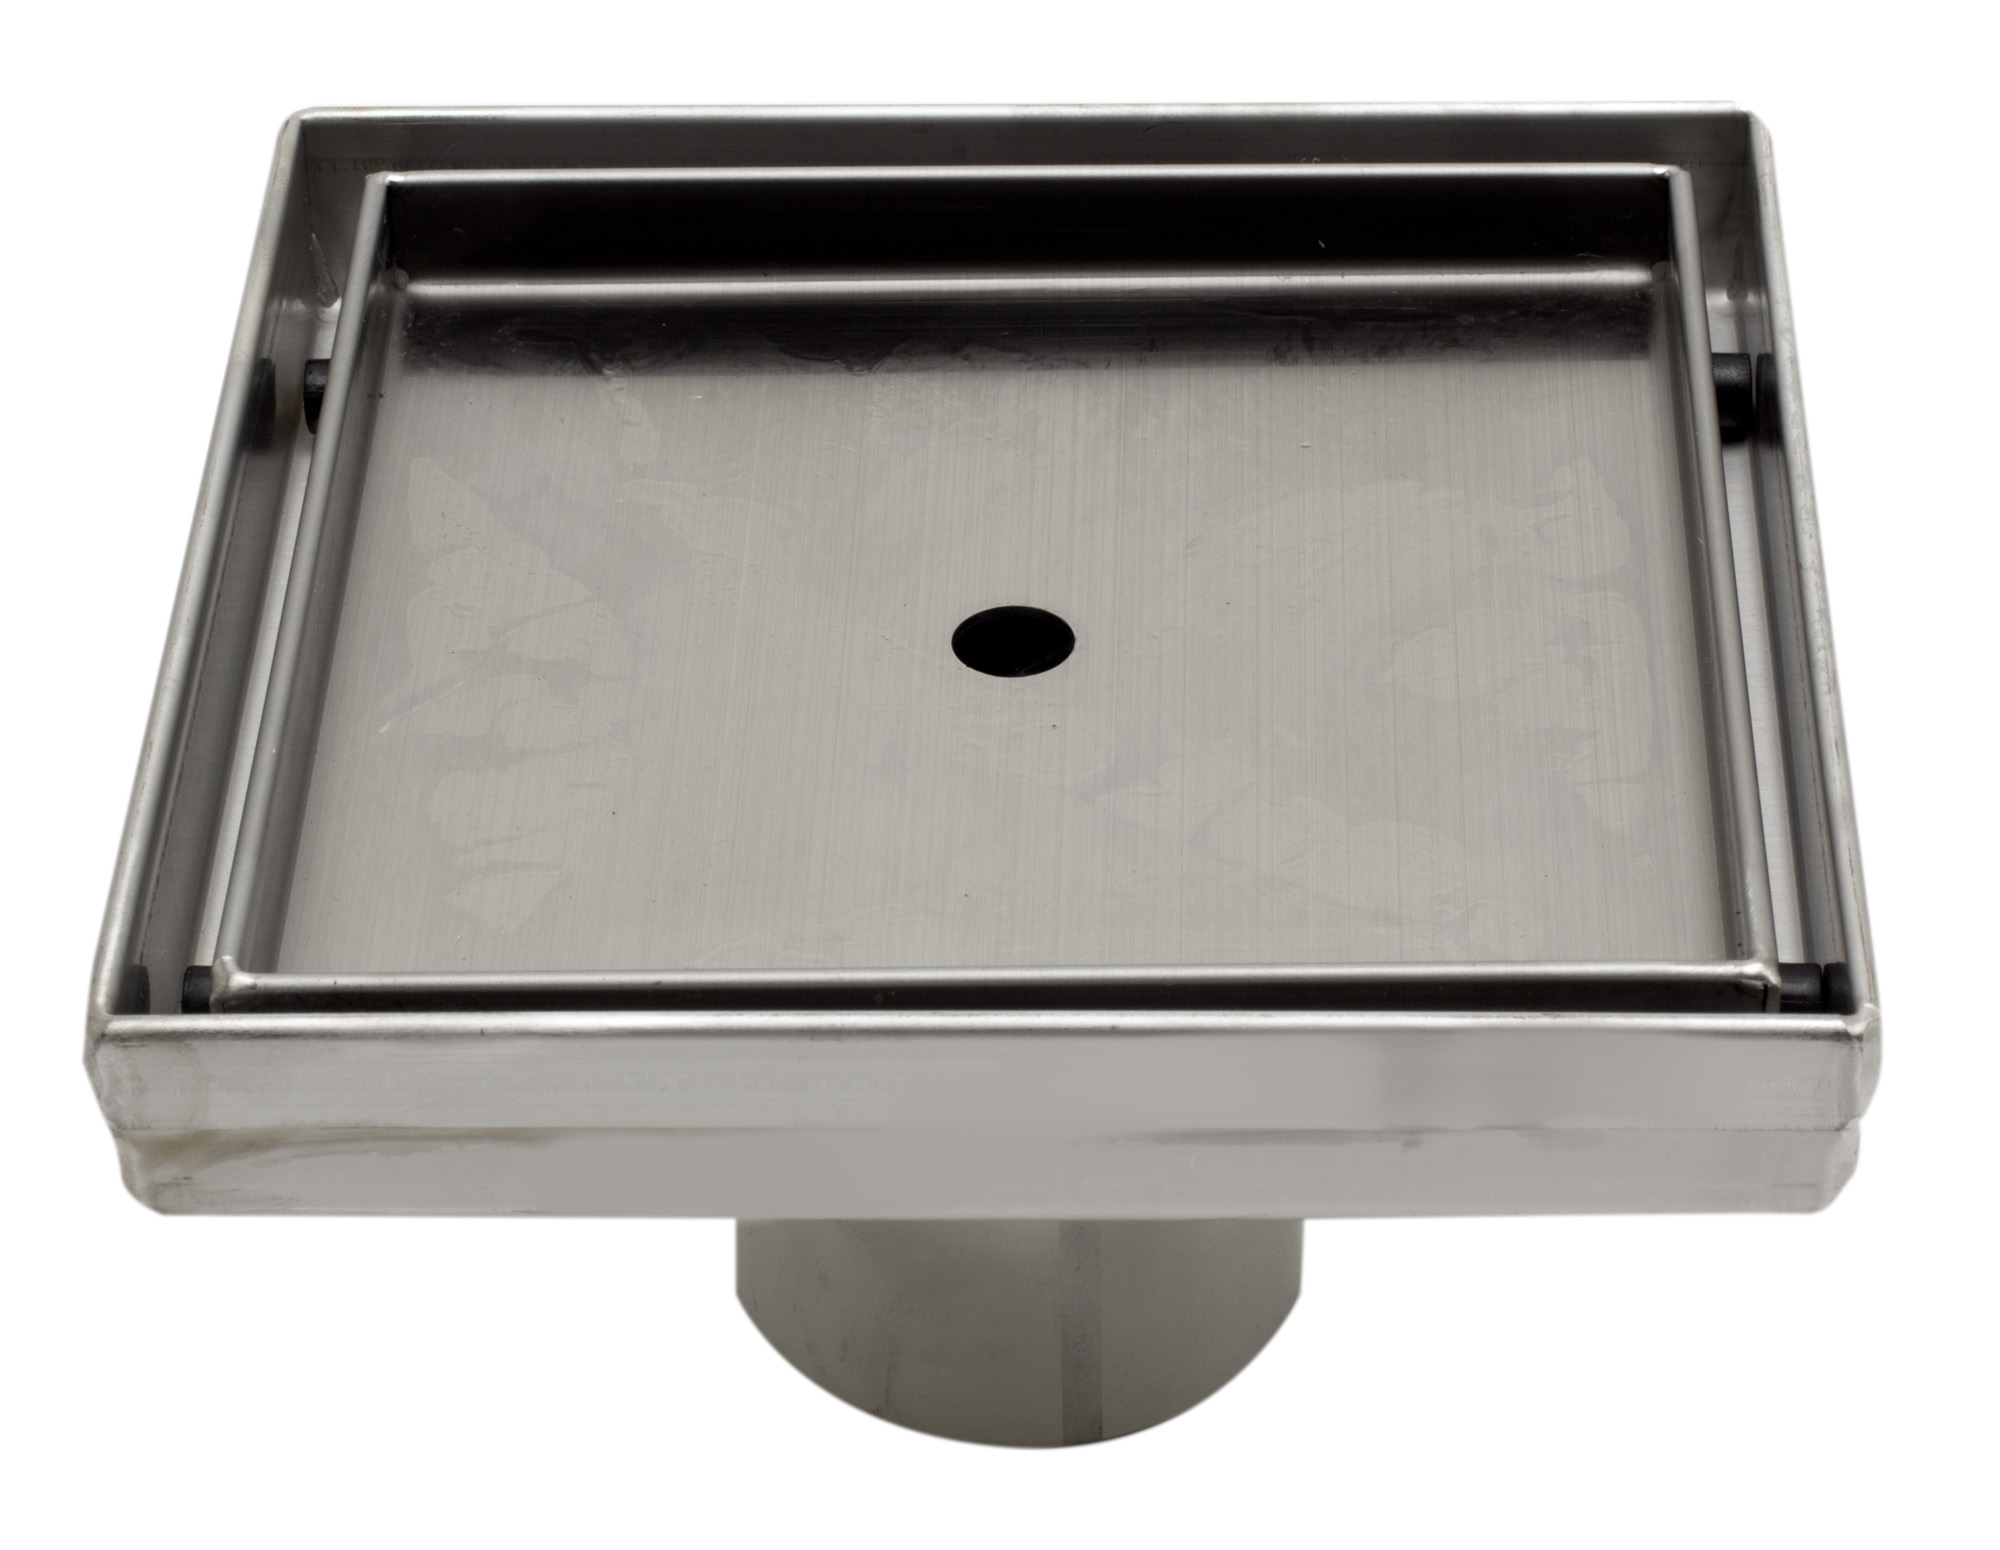 ALFI brand ABSD55A 5" x 5" Modern Square Stainless Steel Shower Drain w/o Cover